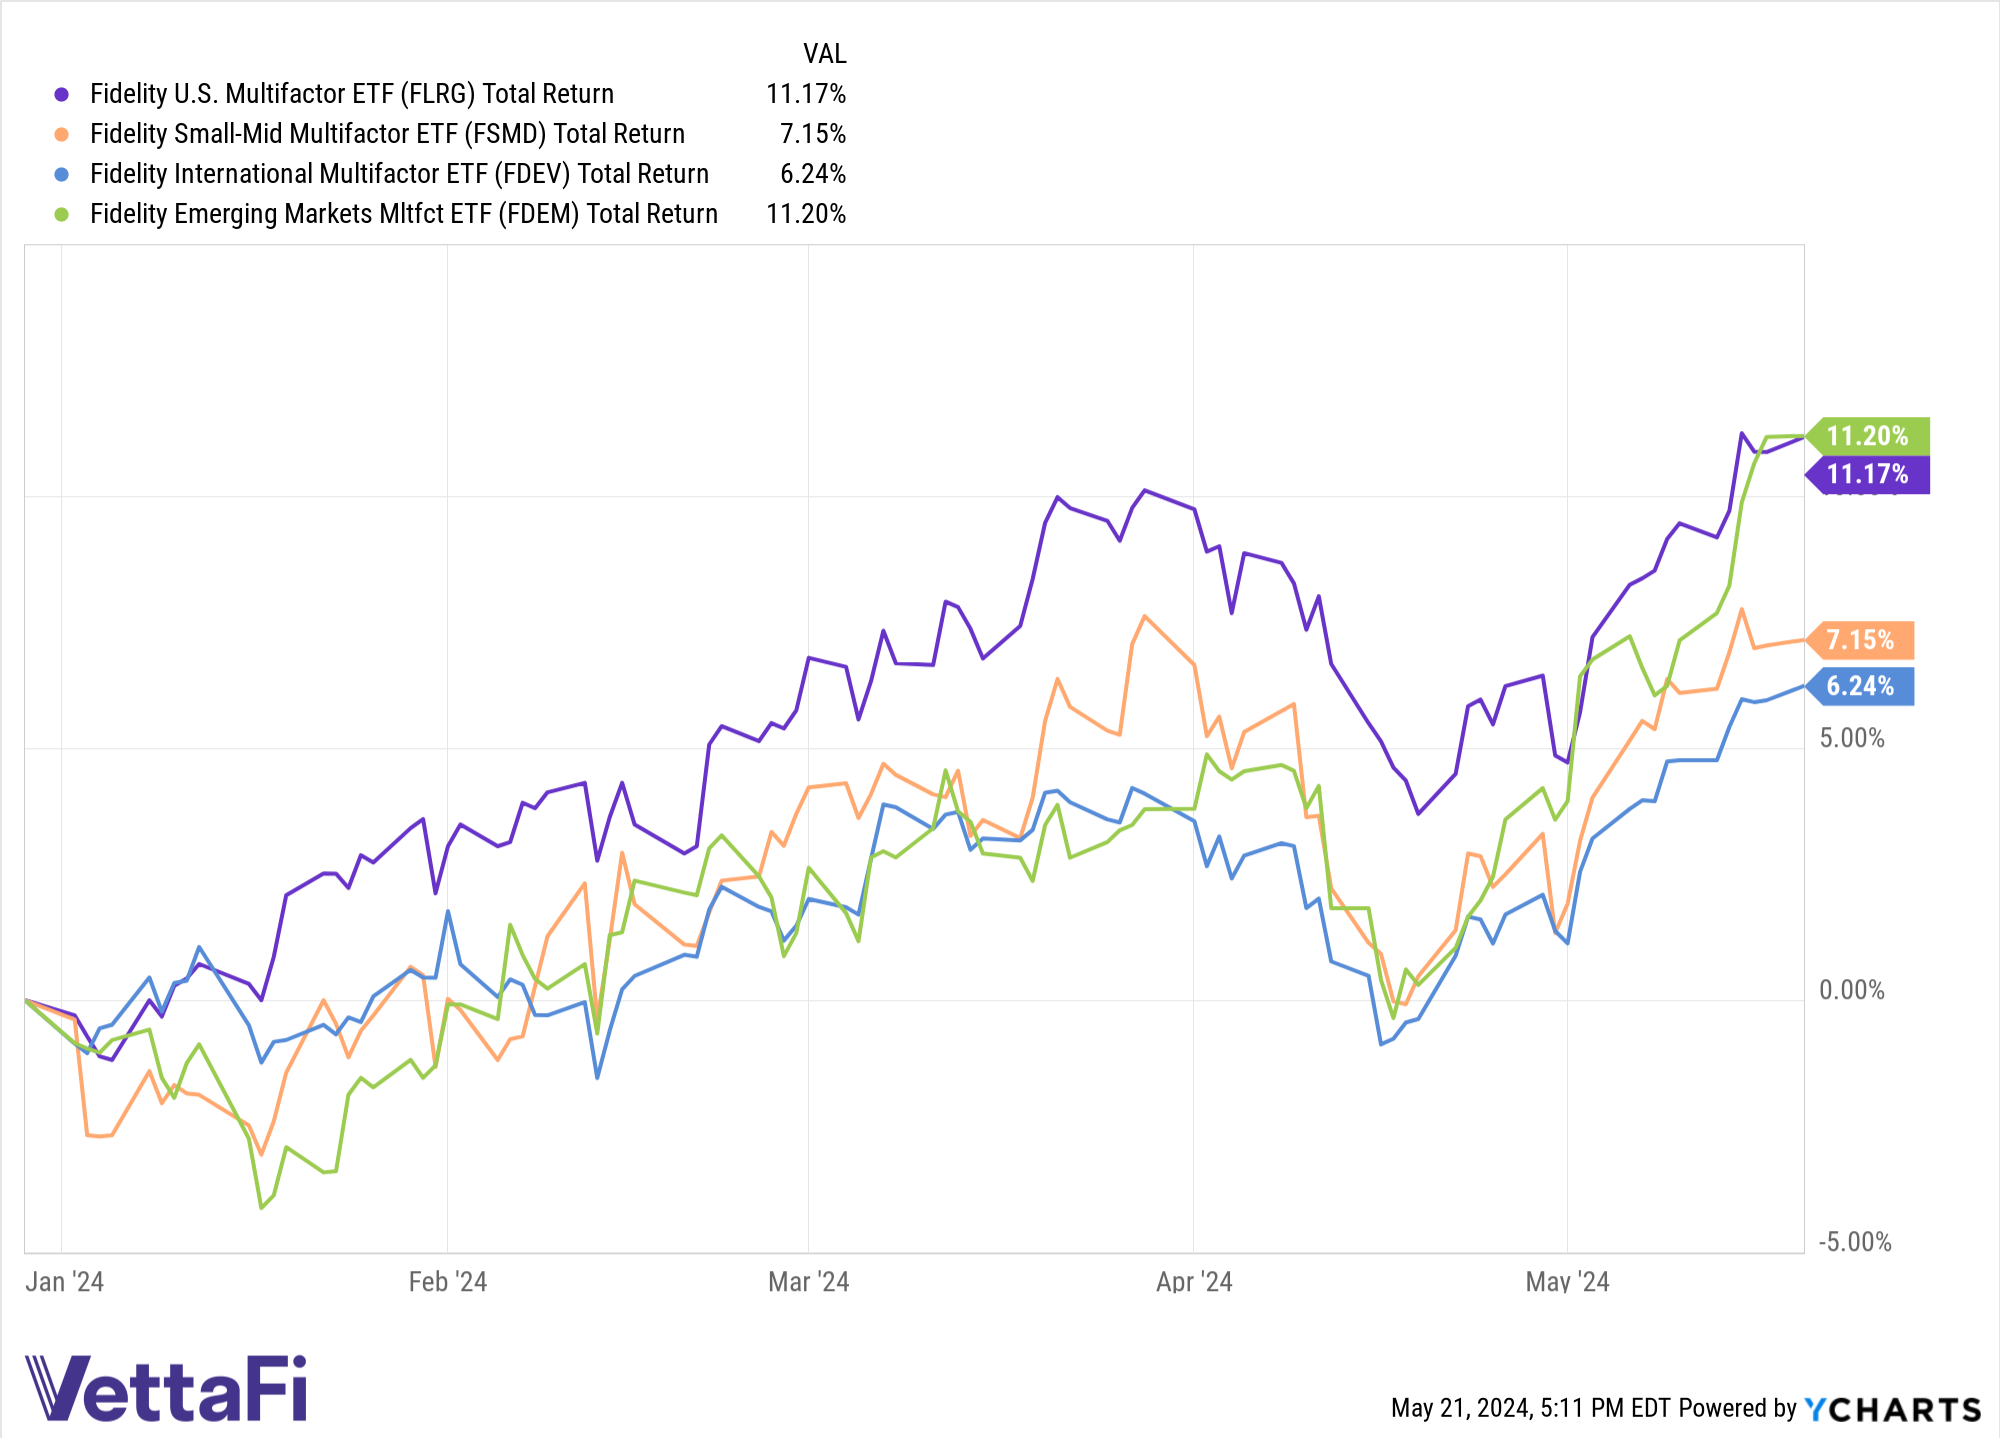 Total returns chart of FLRG, FSMD, FDEV, and FDEM YTD as of 05/20/24.